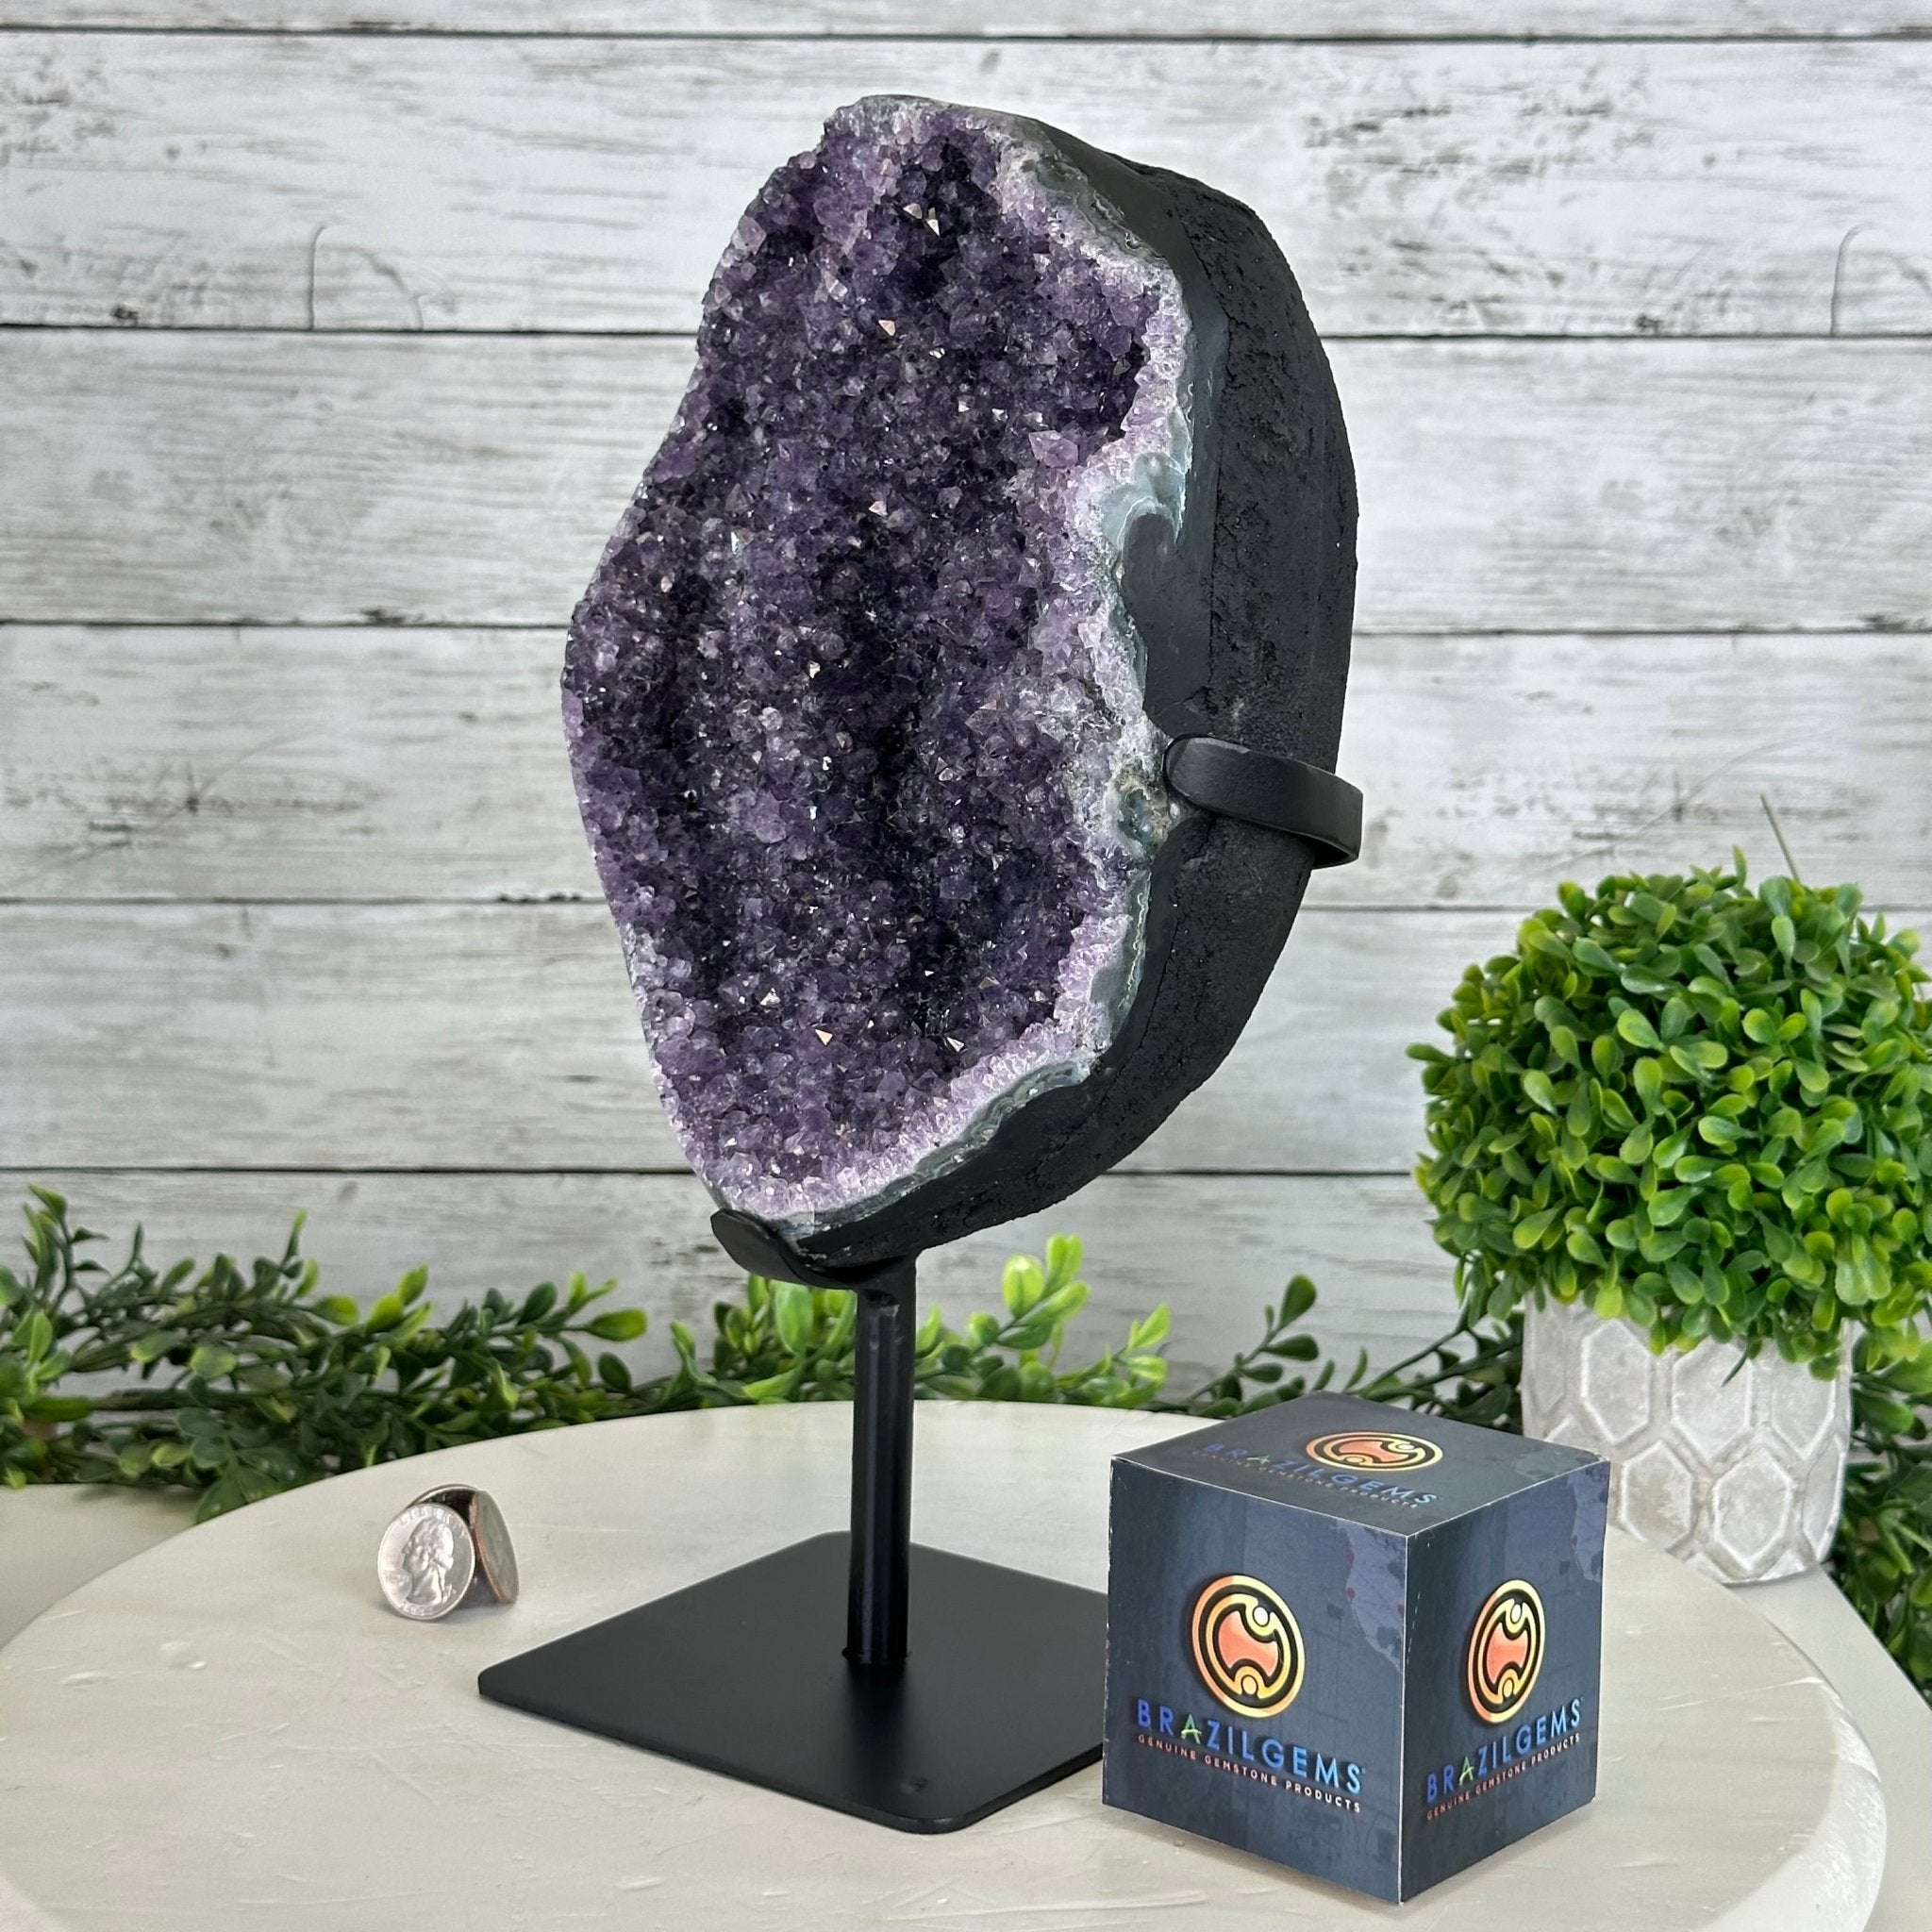 Quality Amethyst Cluster on a Metal Base, 12 lbs & 12.1" Tall #5491 - 0057 - Brazil GemsBrazil GemsQuality Amethyst Cluster on a Metal Base, 12 lbs & 12.1" Tall #5491 - 0057Clusters on Fixed Bases5491 - 0057